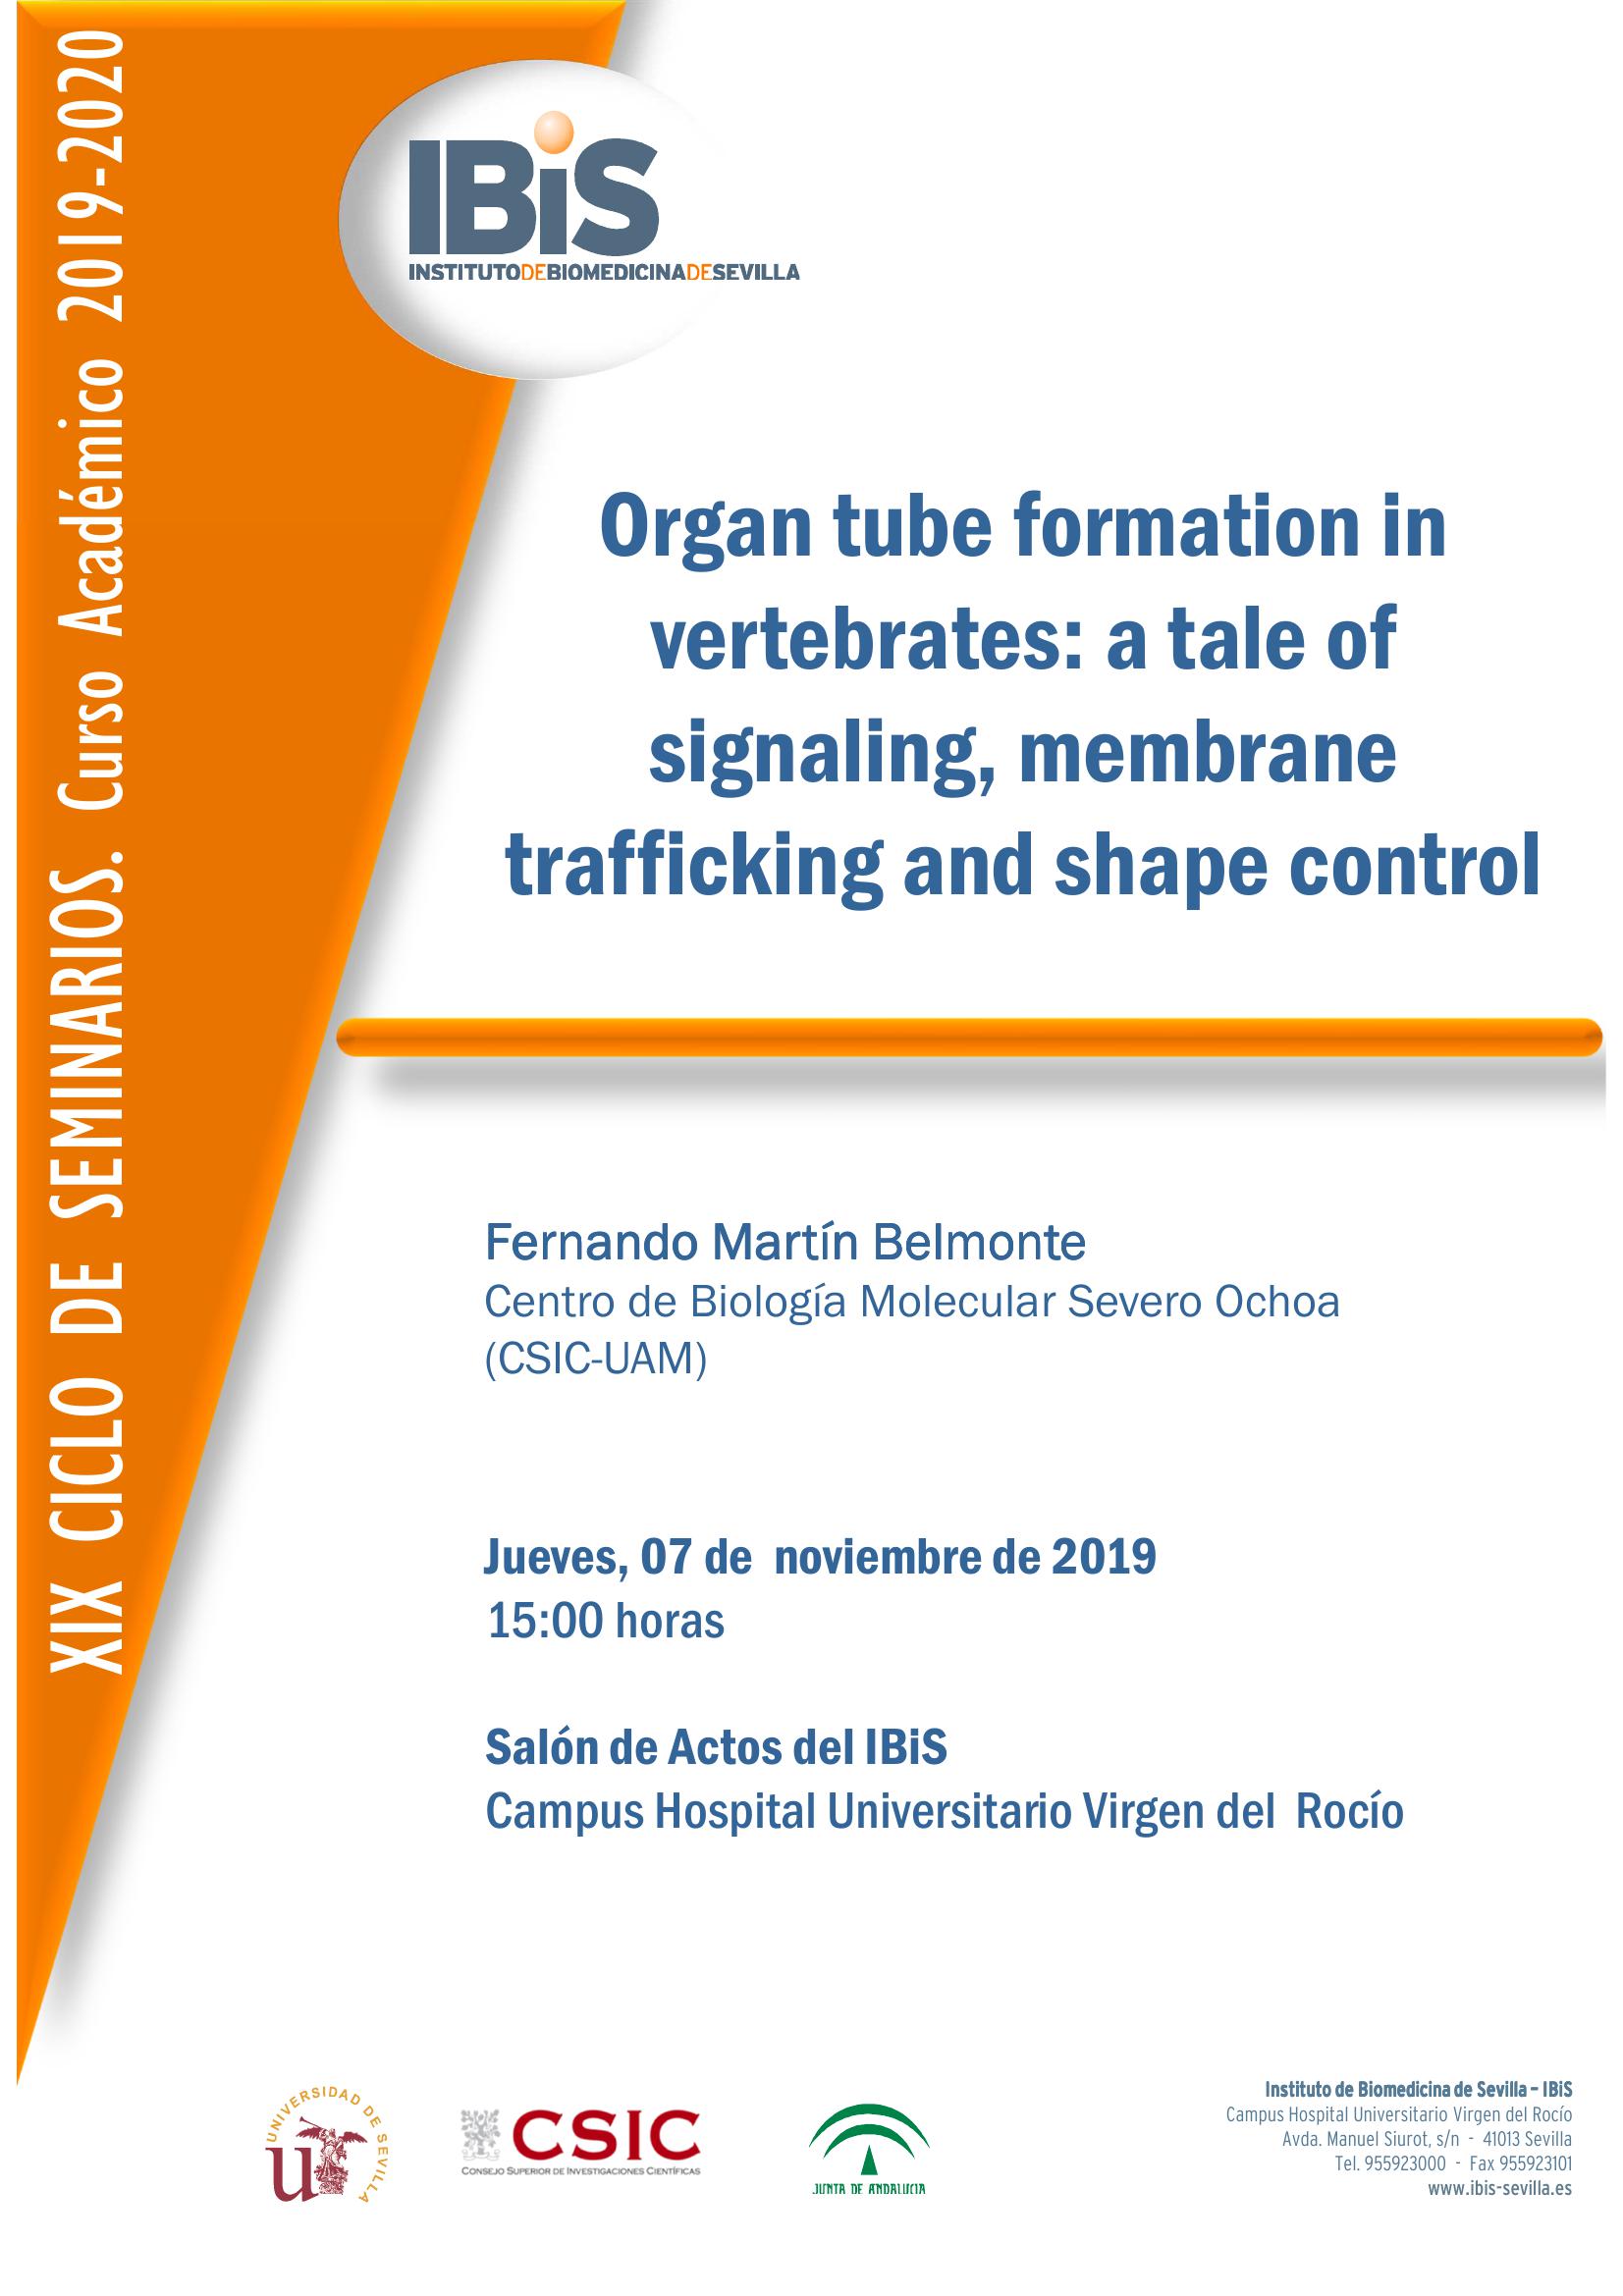 Poster: Organ tube formation in vertebrates: a tale of signaling, membrane trafficking and shape control